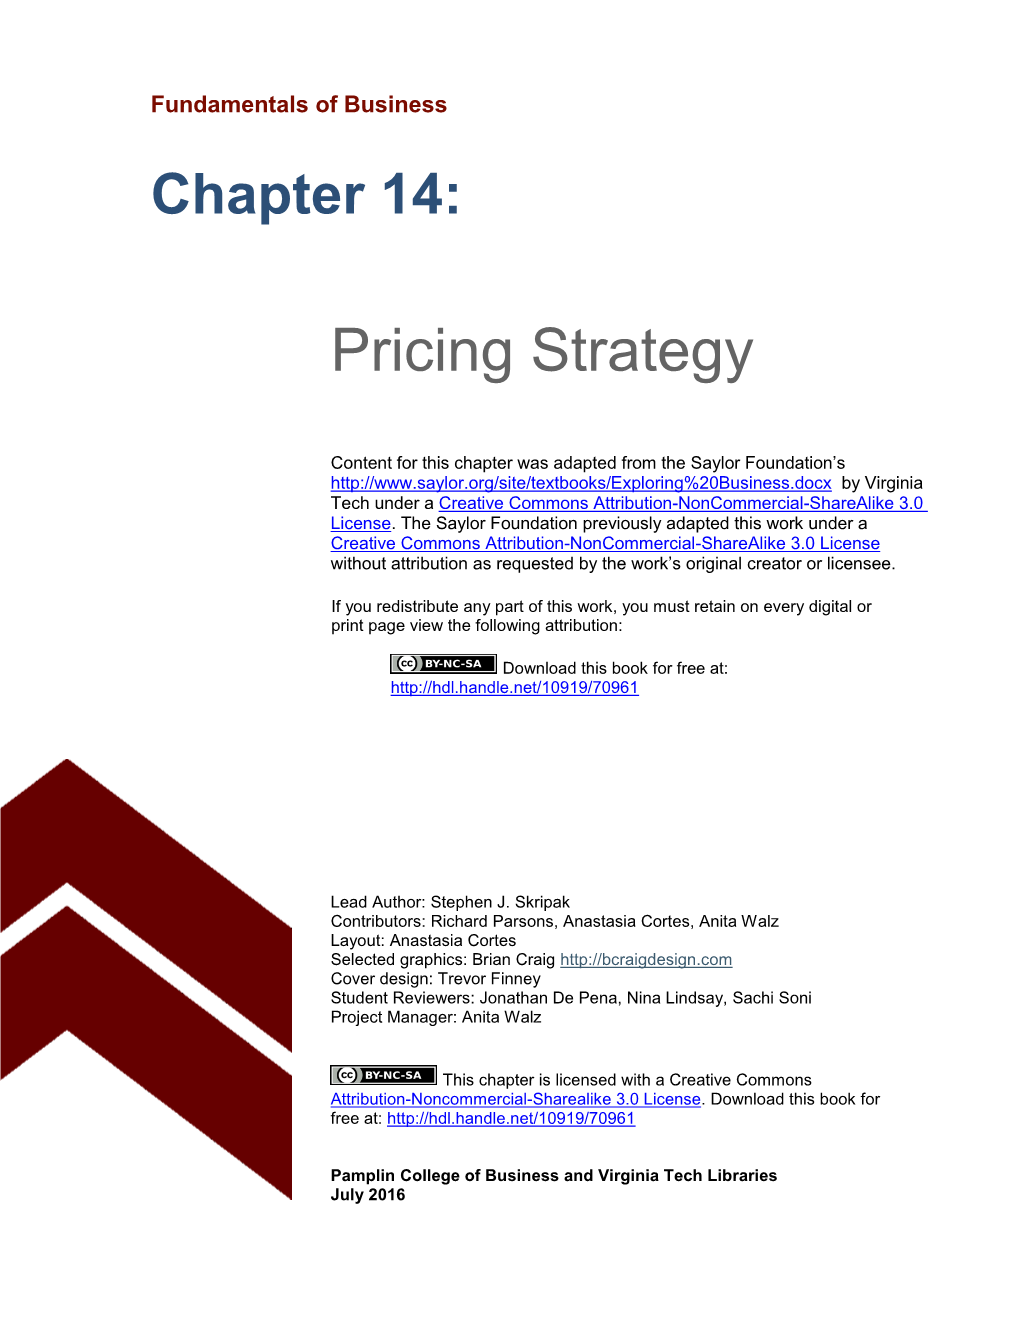 Chapter 14 Pricing Strategy.Pdf (1.365Mb)